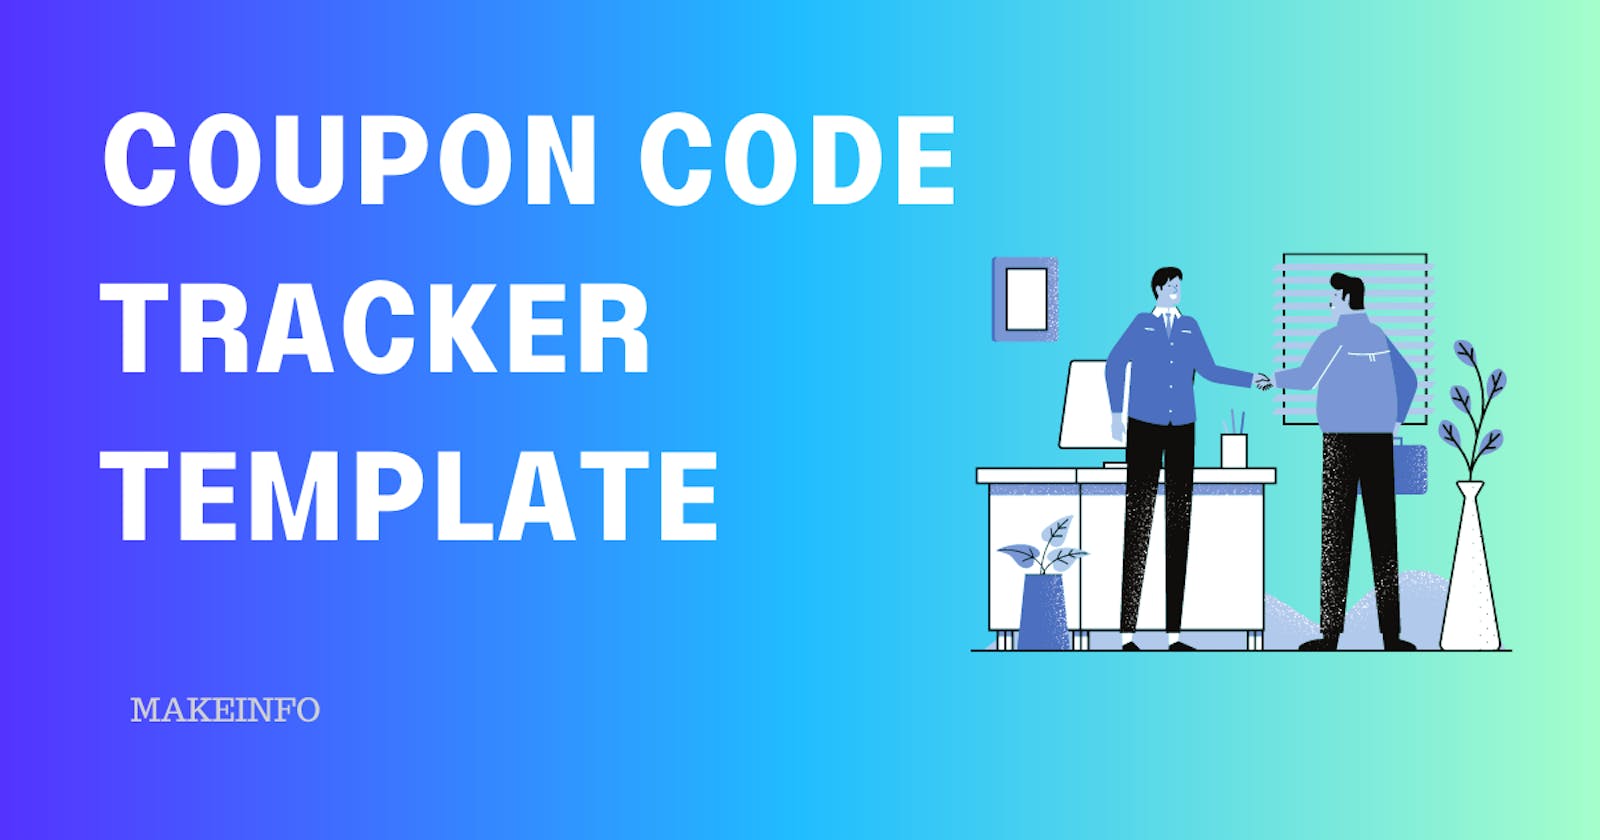 Get Organized and Thrive: Coupon Code Tracker  Template for Business Success